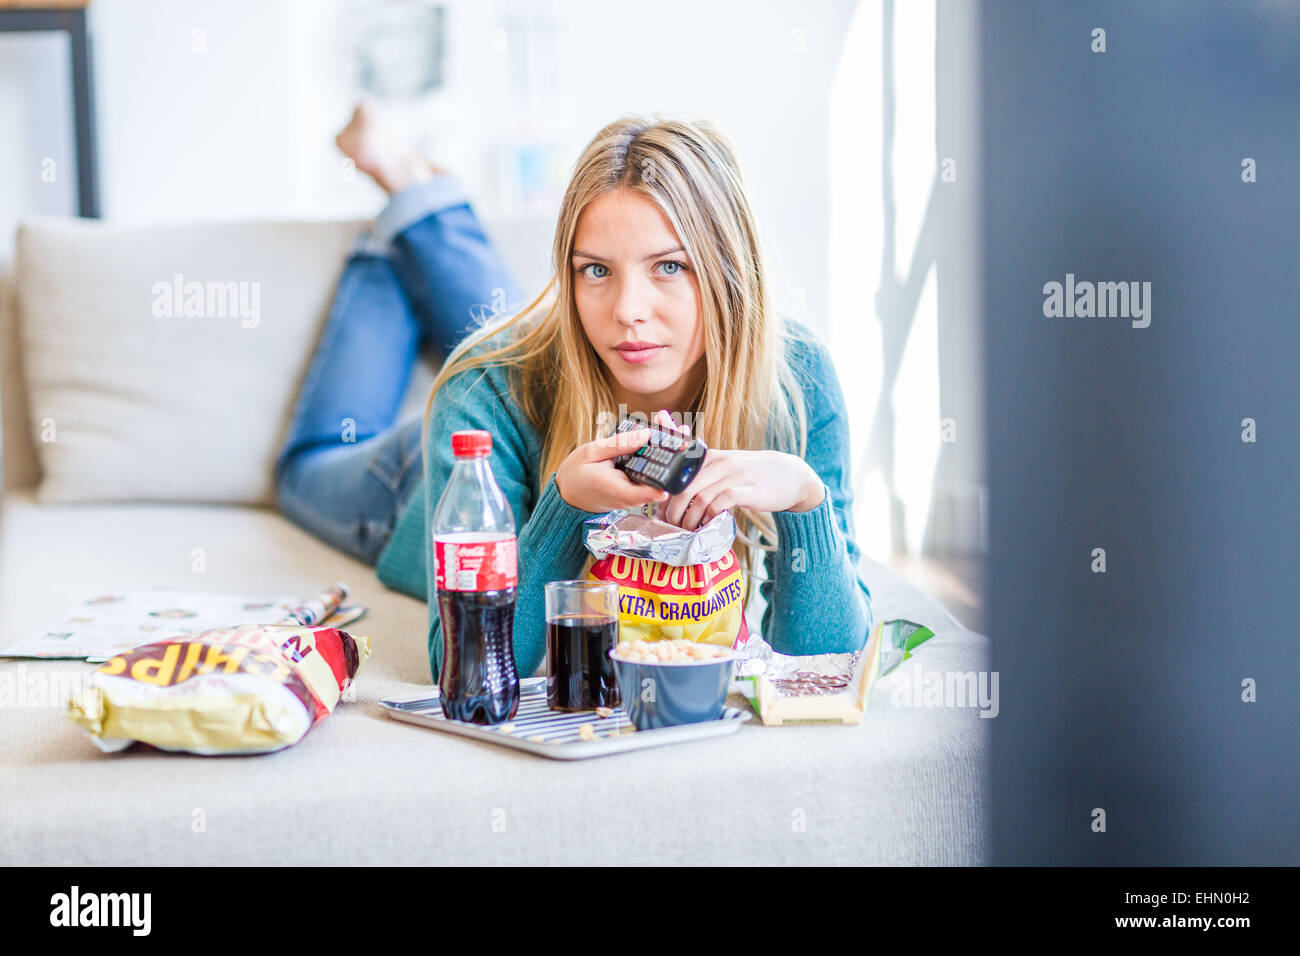 Woman snacking while watching TV. Stock Photo